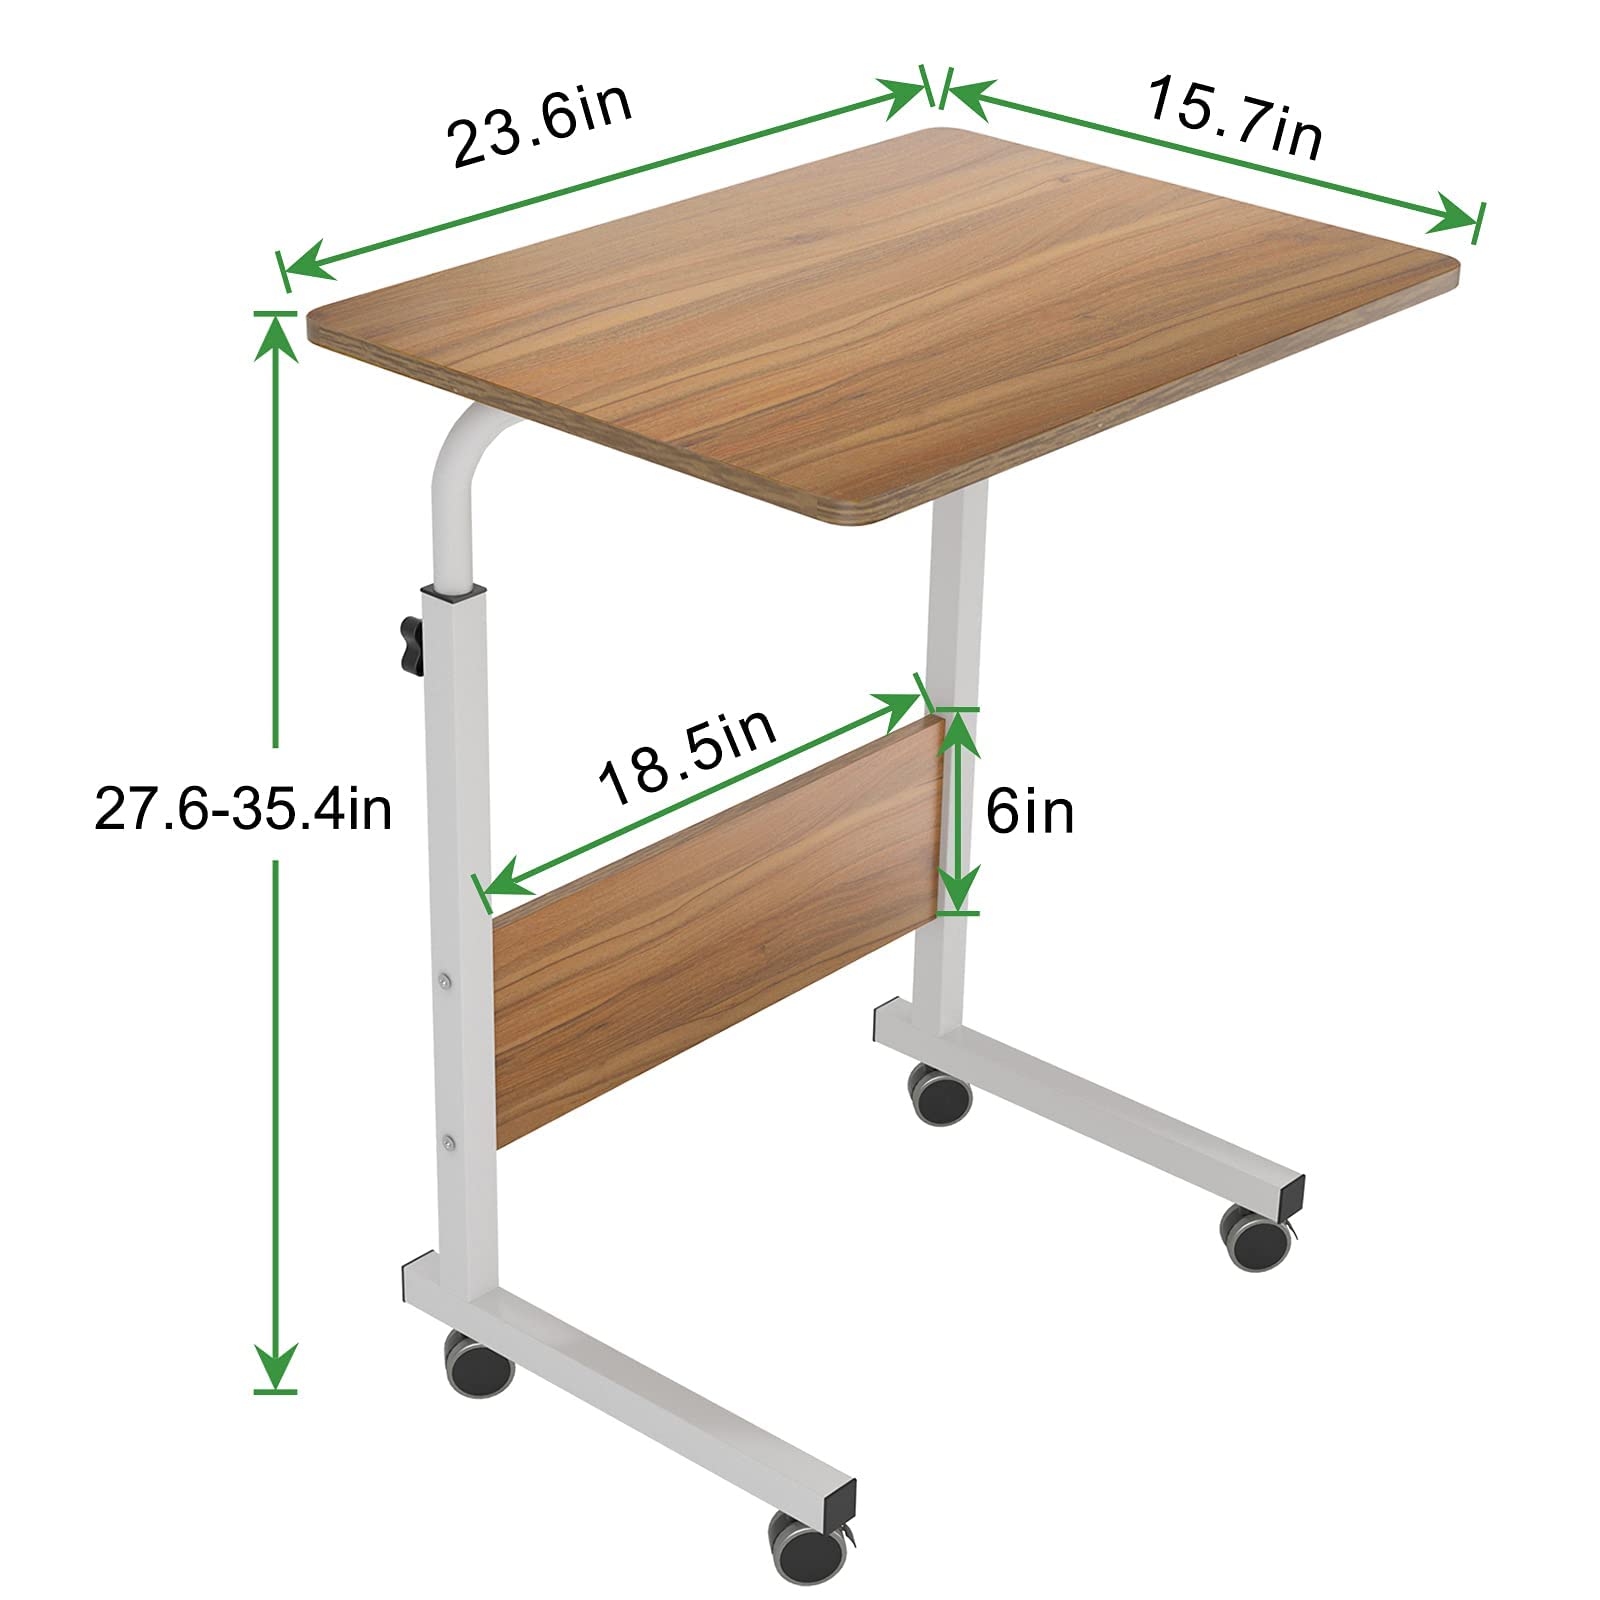 VIO Portable Laptop Table with Rolling Castor Wheels, Adjustable Overbed Mobile Table, Portable Laptop Computer Stand Desk Cart Tray